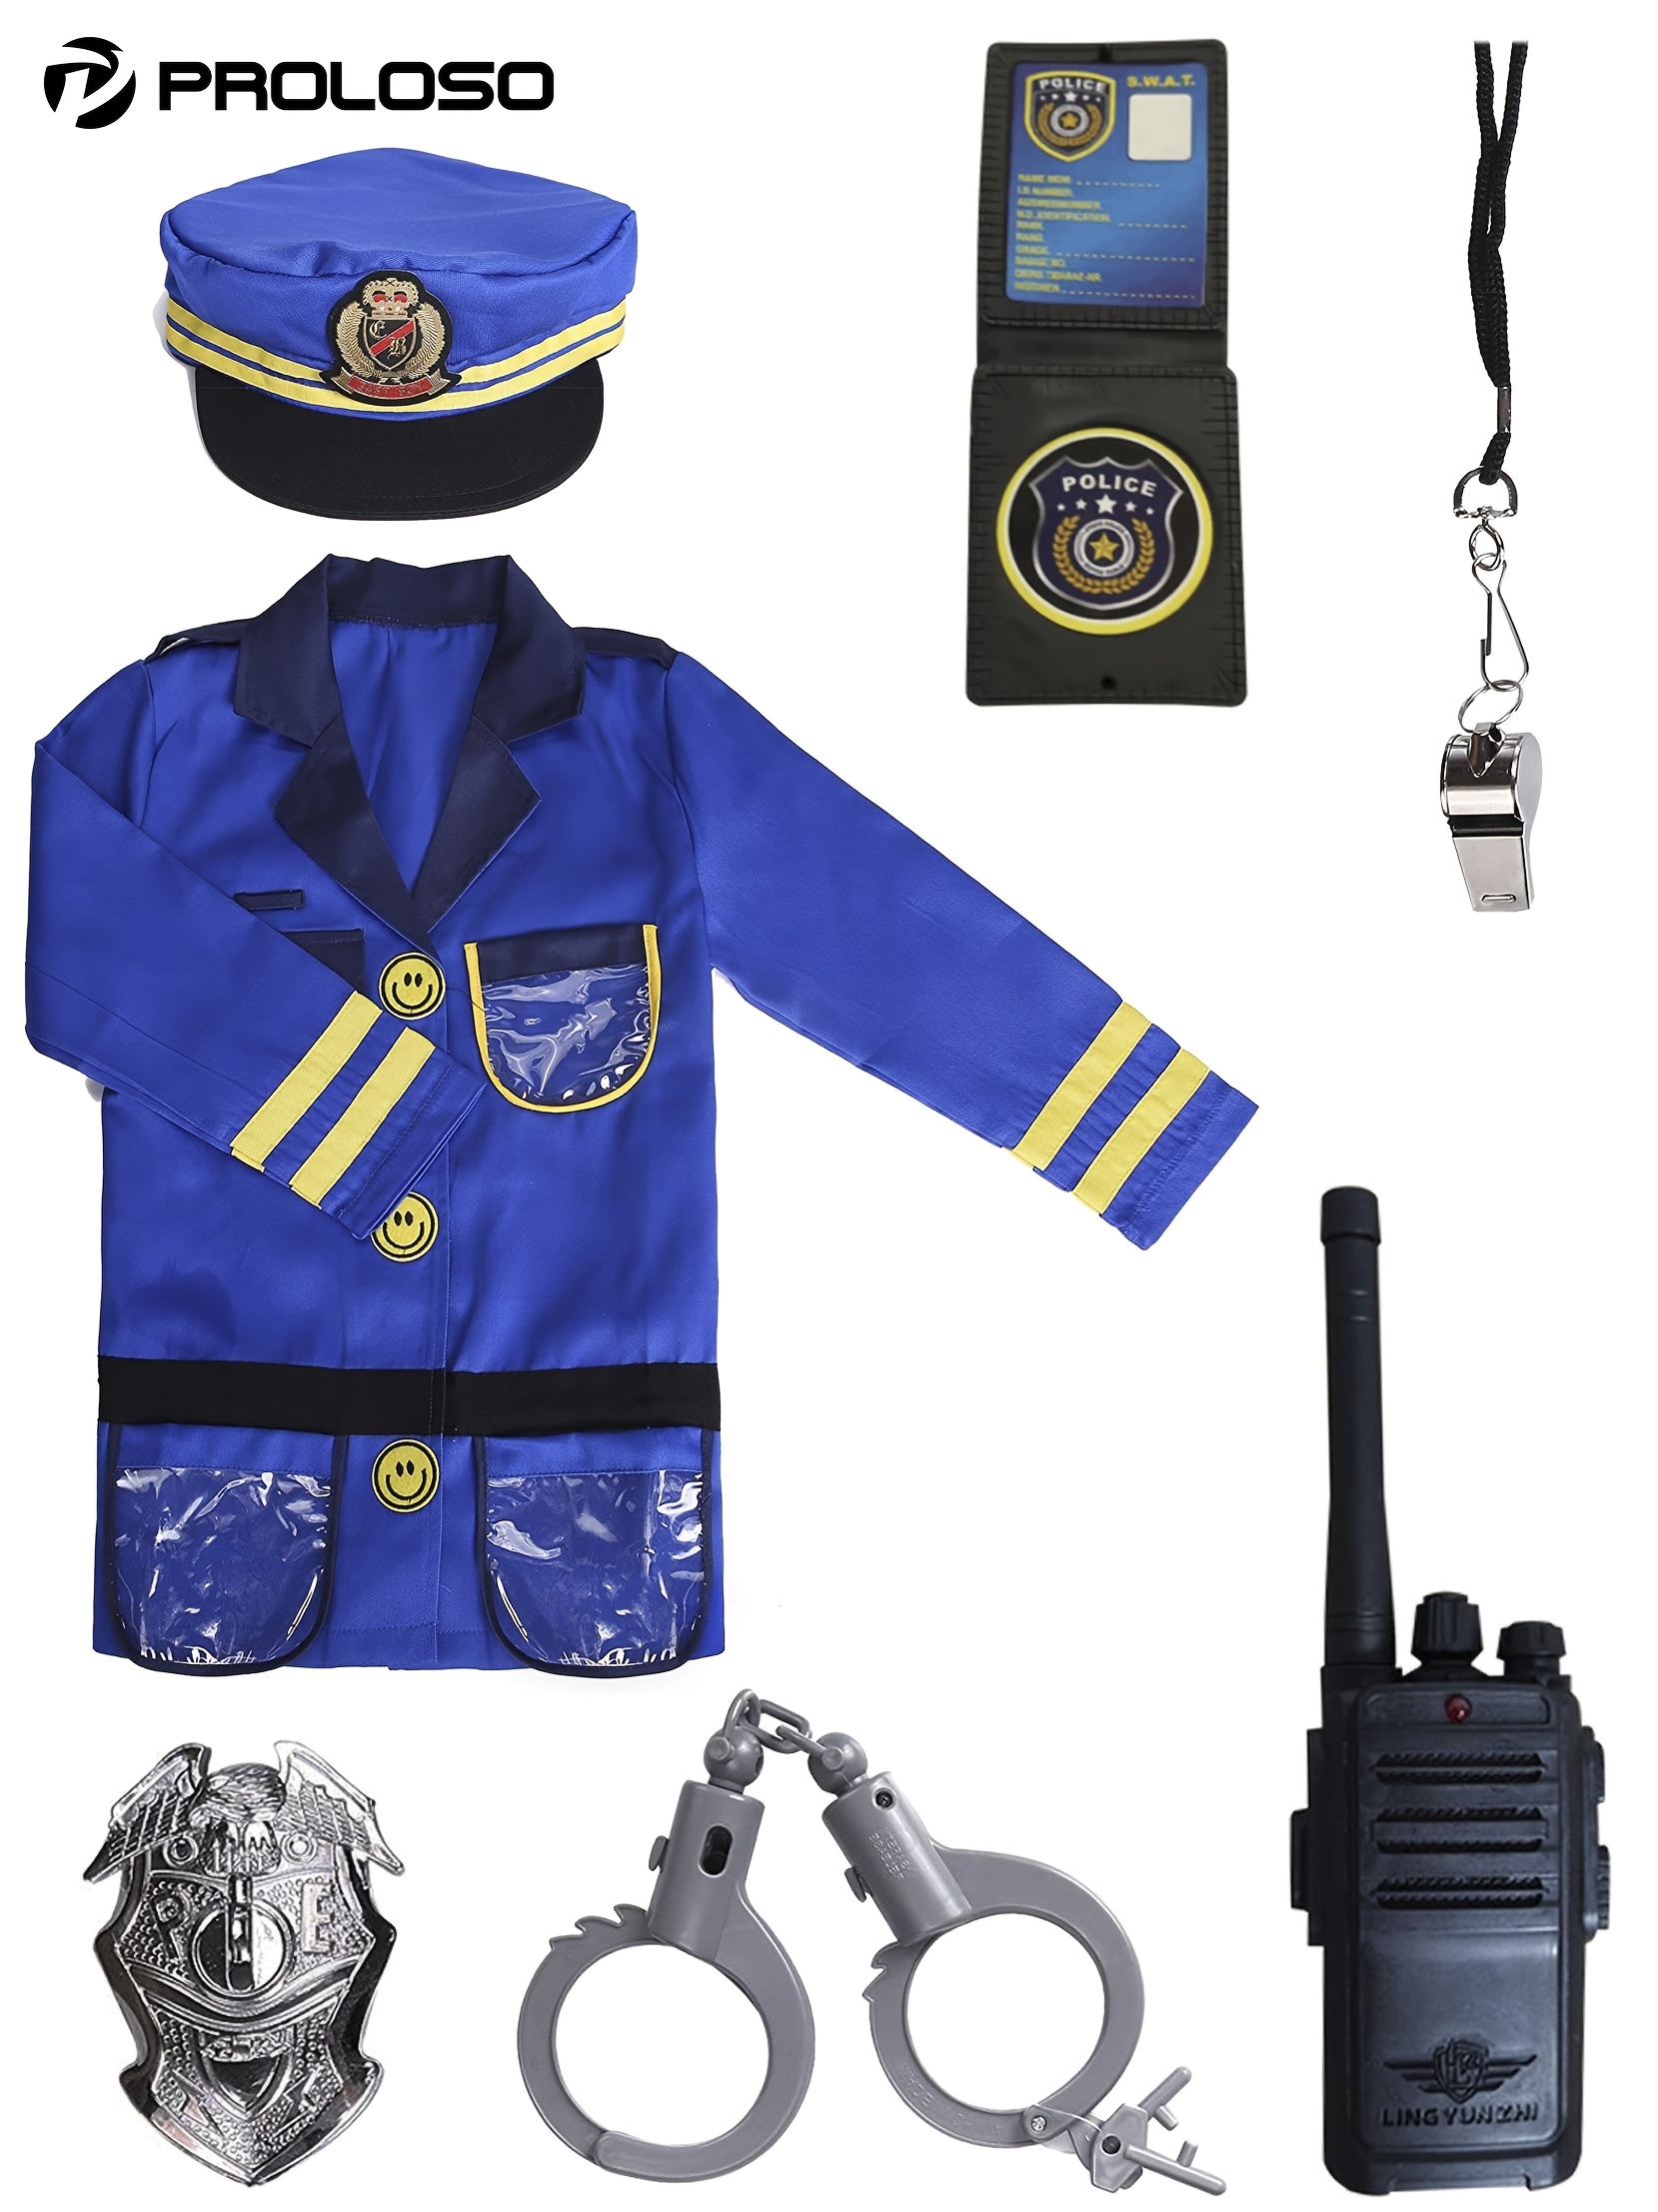 Boys Police Officer Role Play Kit Cop Dress Up Accessories Ages 3-6 Years Old